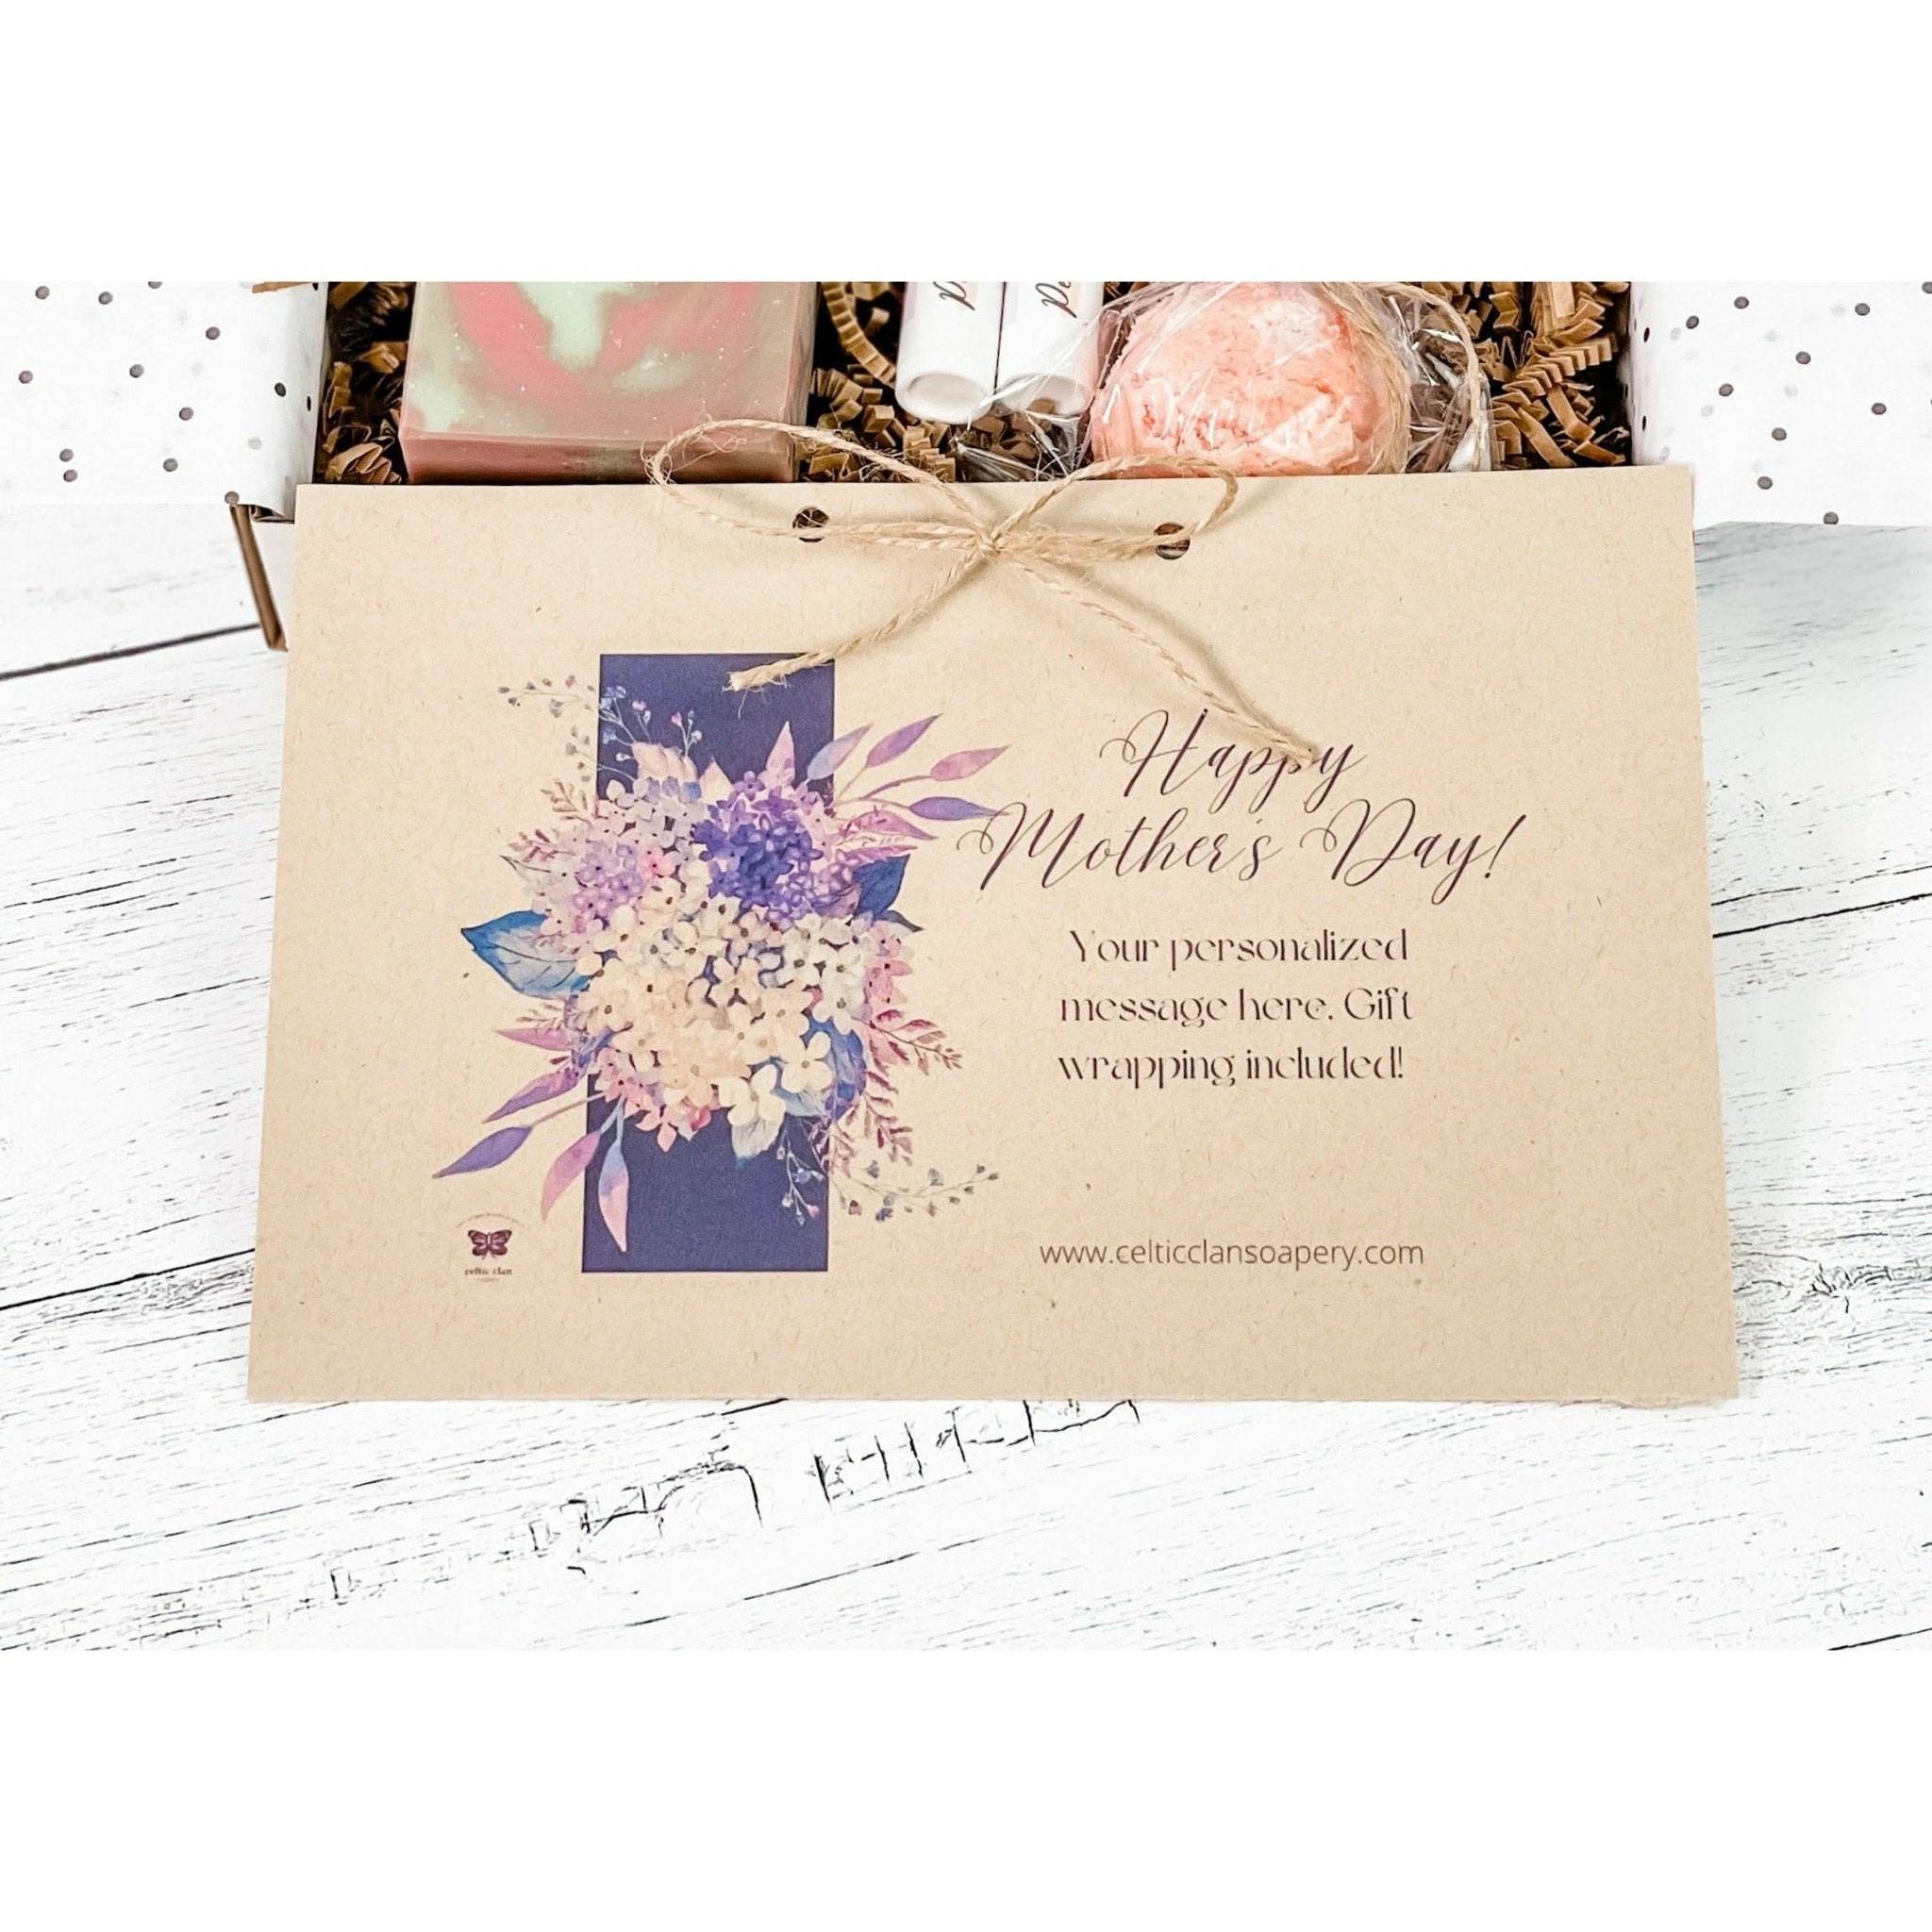 Personalized Bath and Body Gift Set | Lavender | Greeting Card - Celtic Clan Soapery LLC